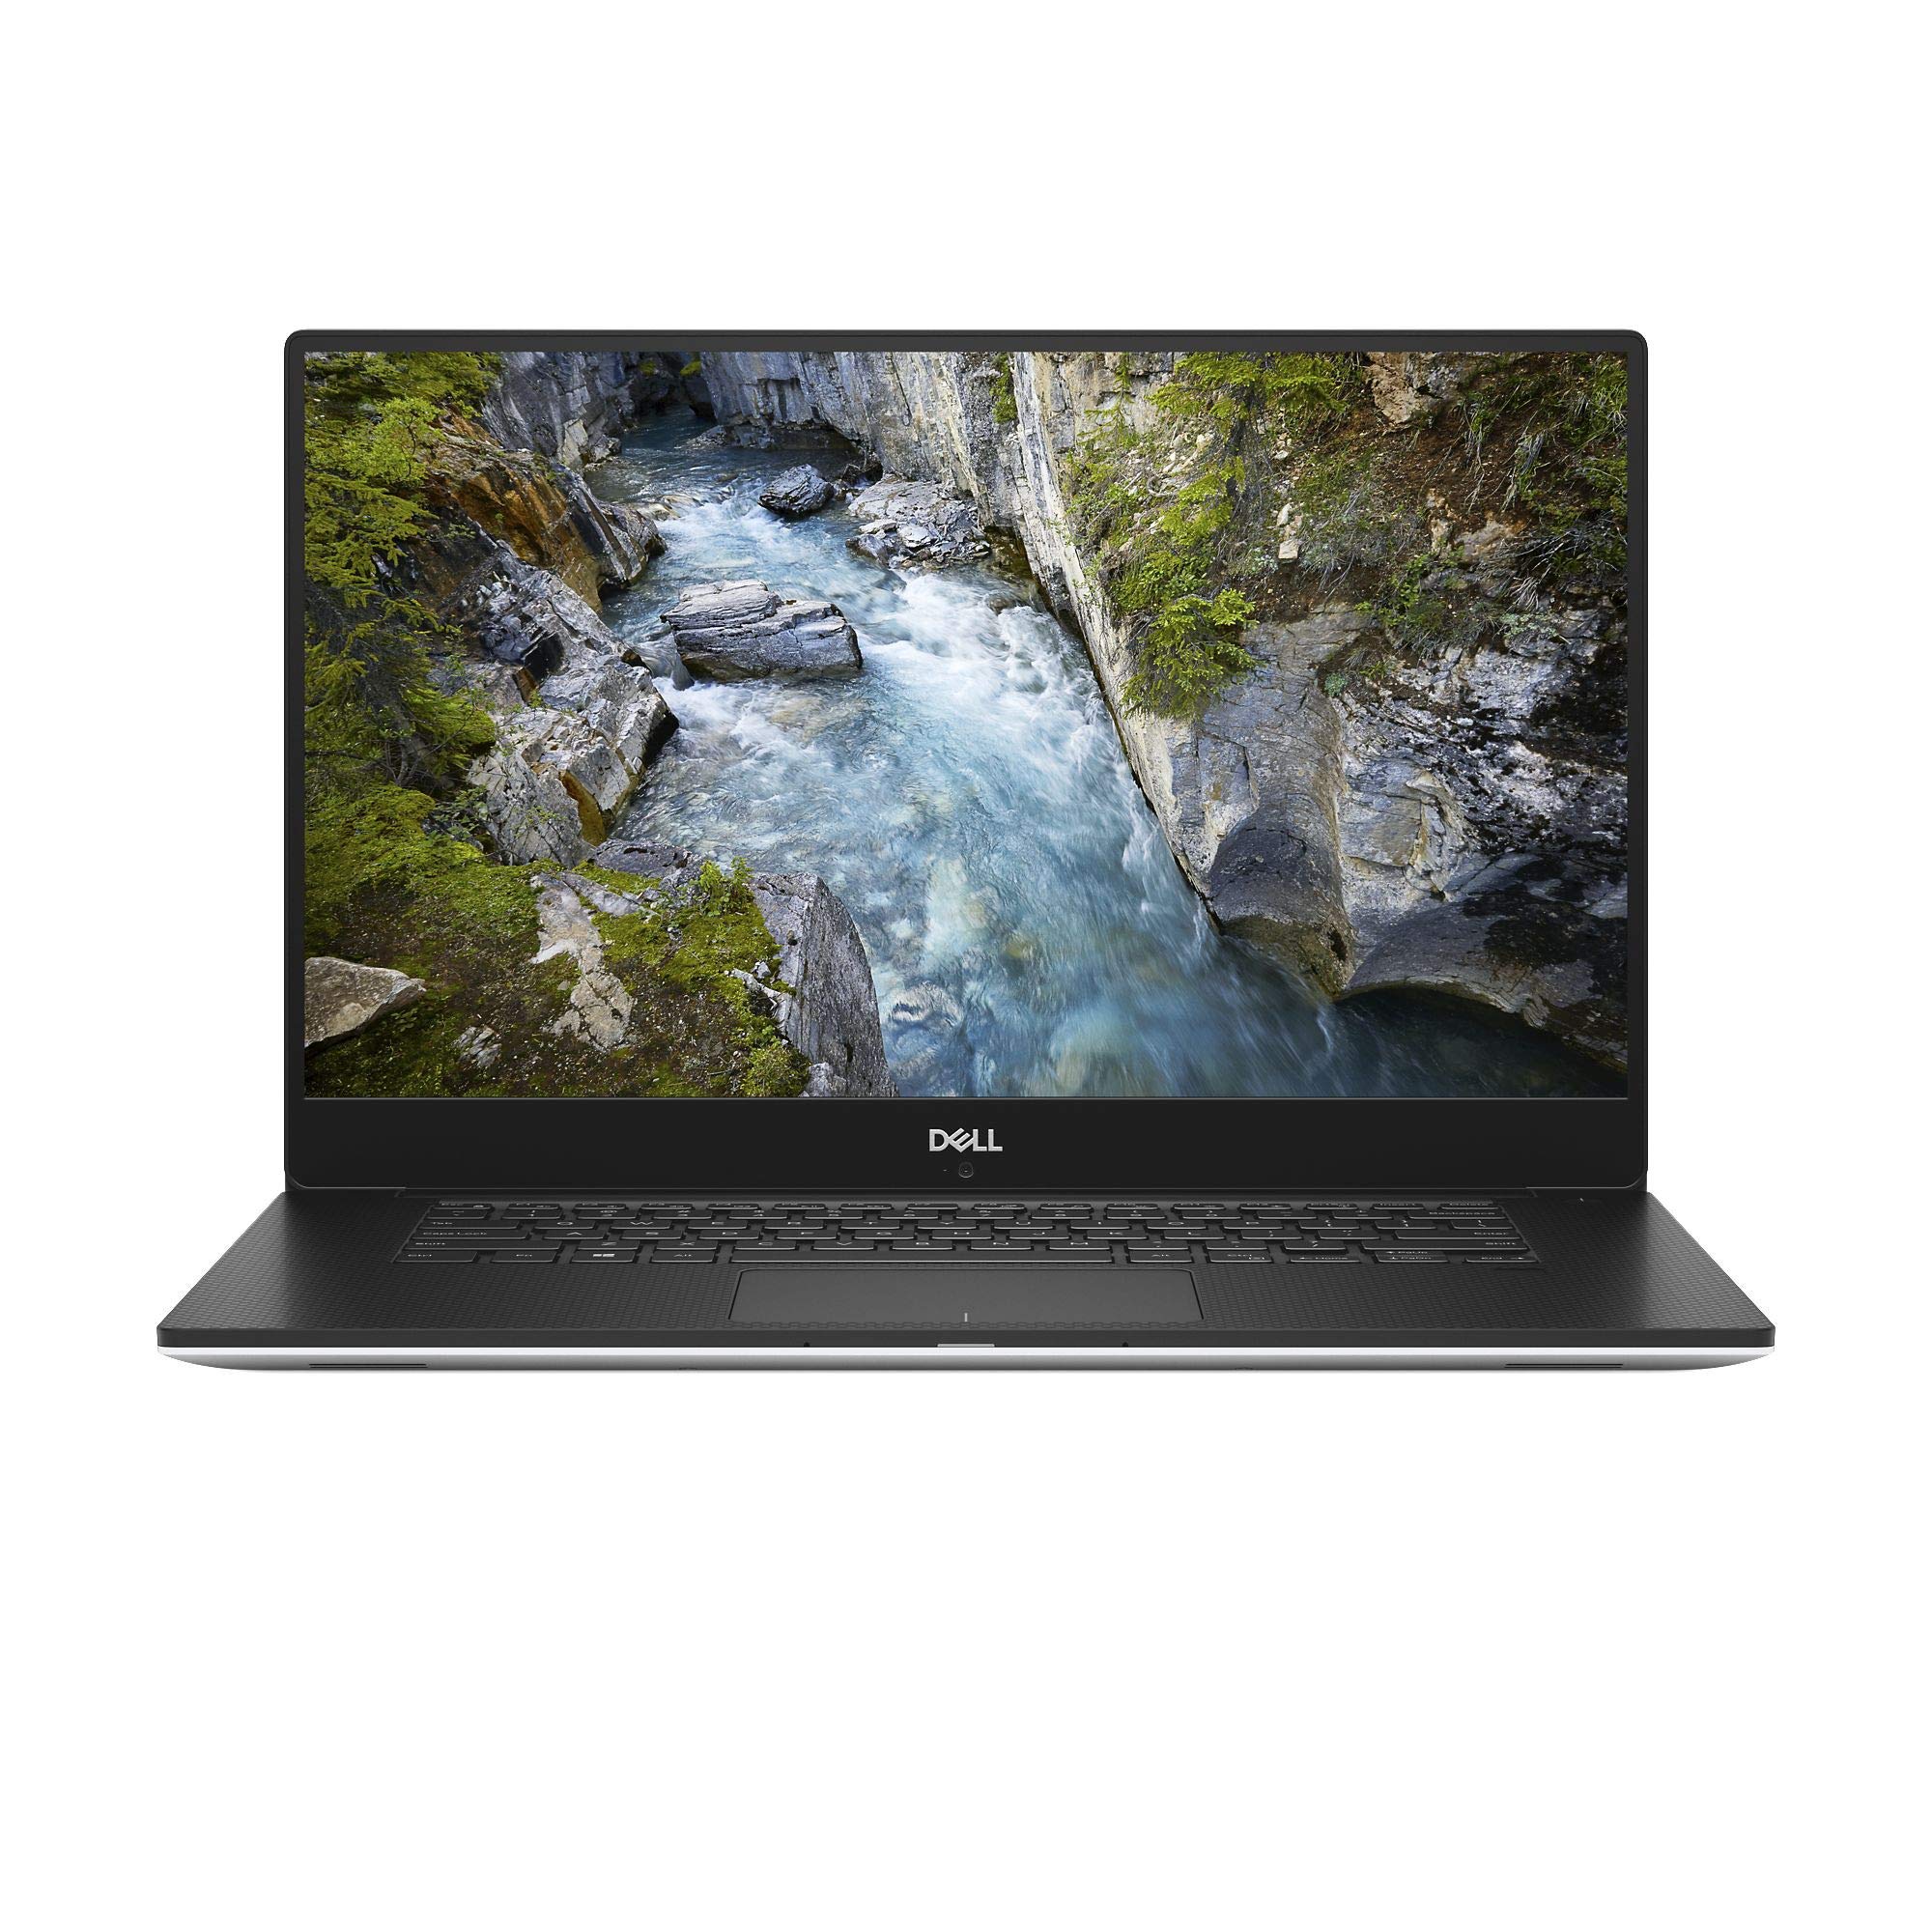 Dell Precision 5530 1920 X 1080 15.69" Touchscreen LCD 2-in-1 Mobile Workstation with Intel Core i7-8706G, 16GB RAM, 512GB SSD